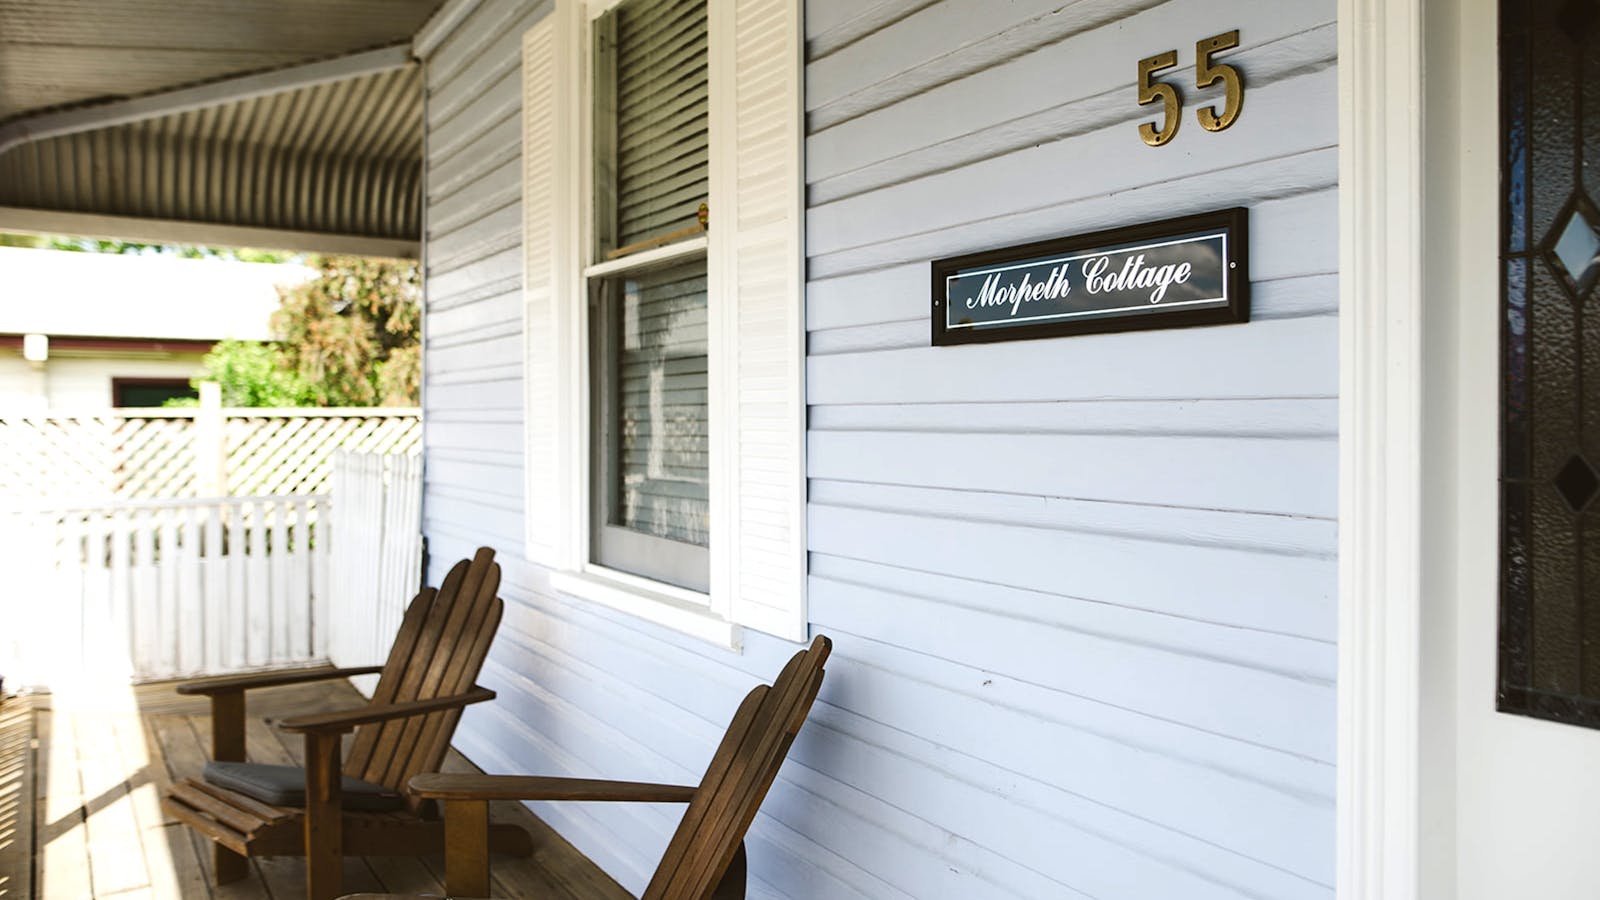 Wrap around verandah with sitting nooks to relax and take in the quiet country